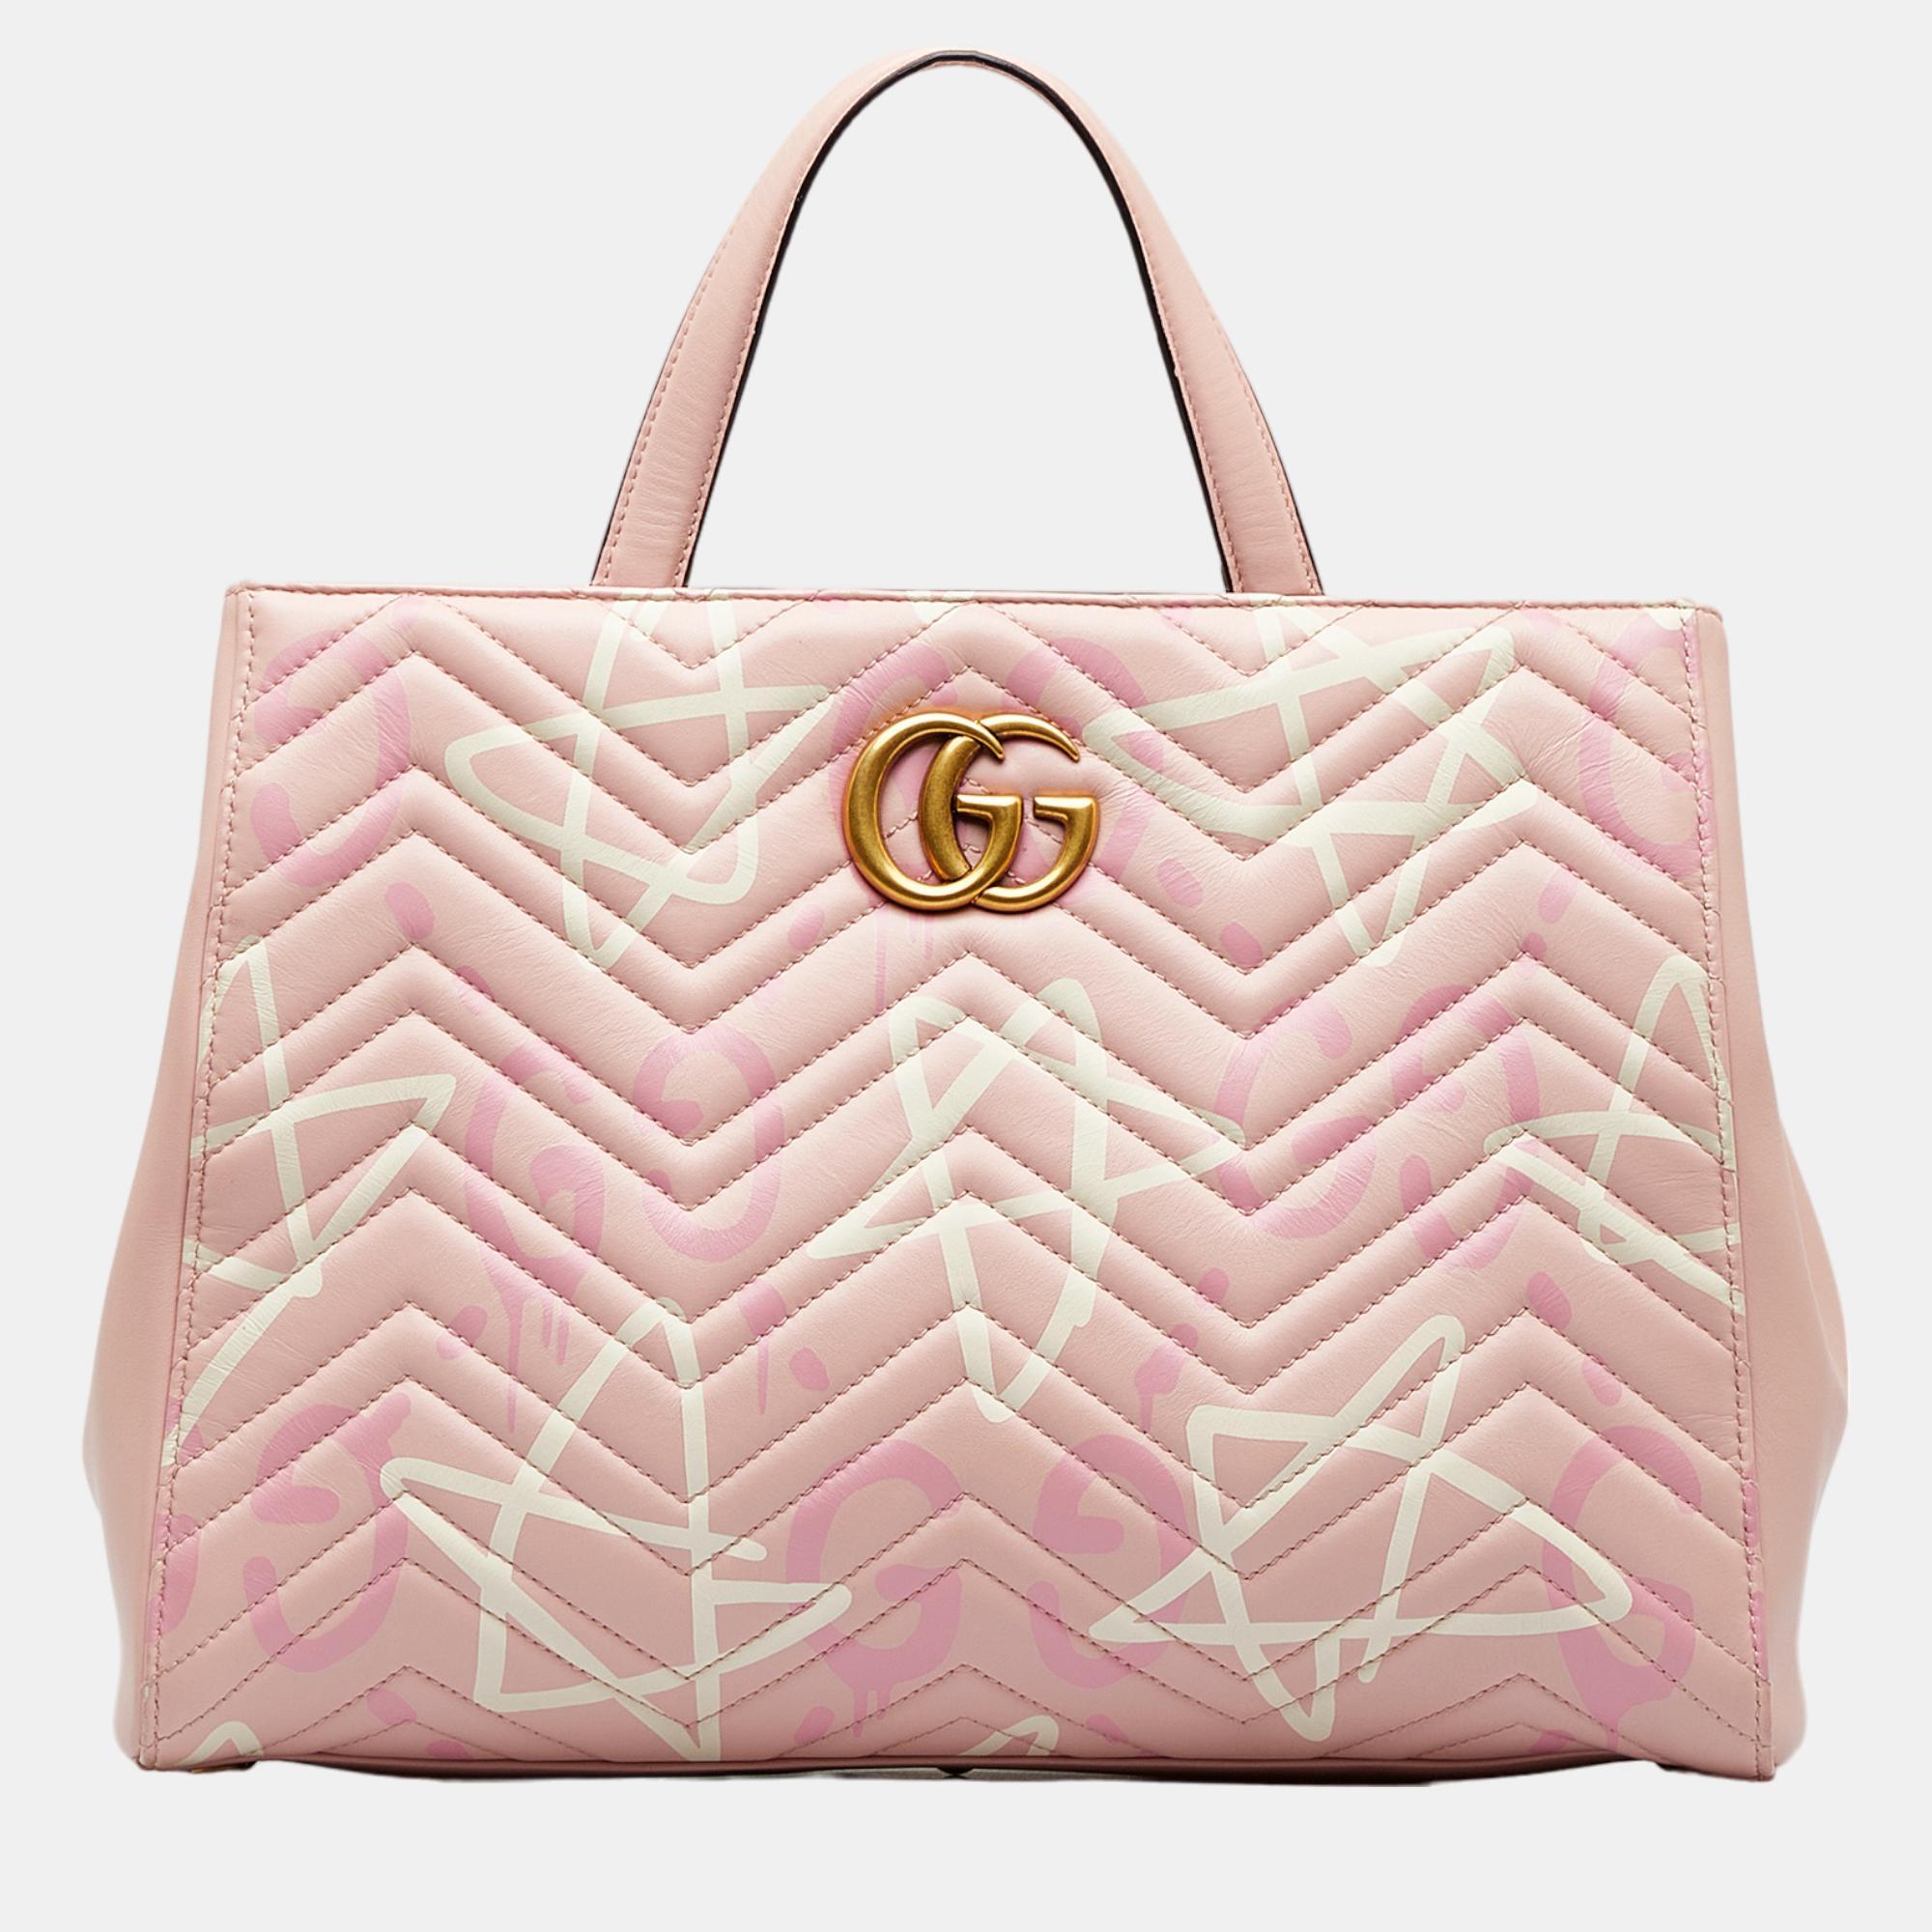 Gucci Pink GG Marmont Ghost Satchel